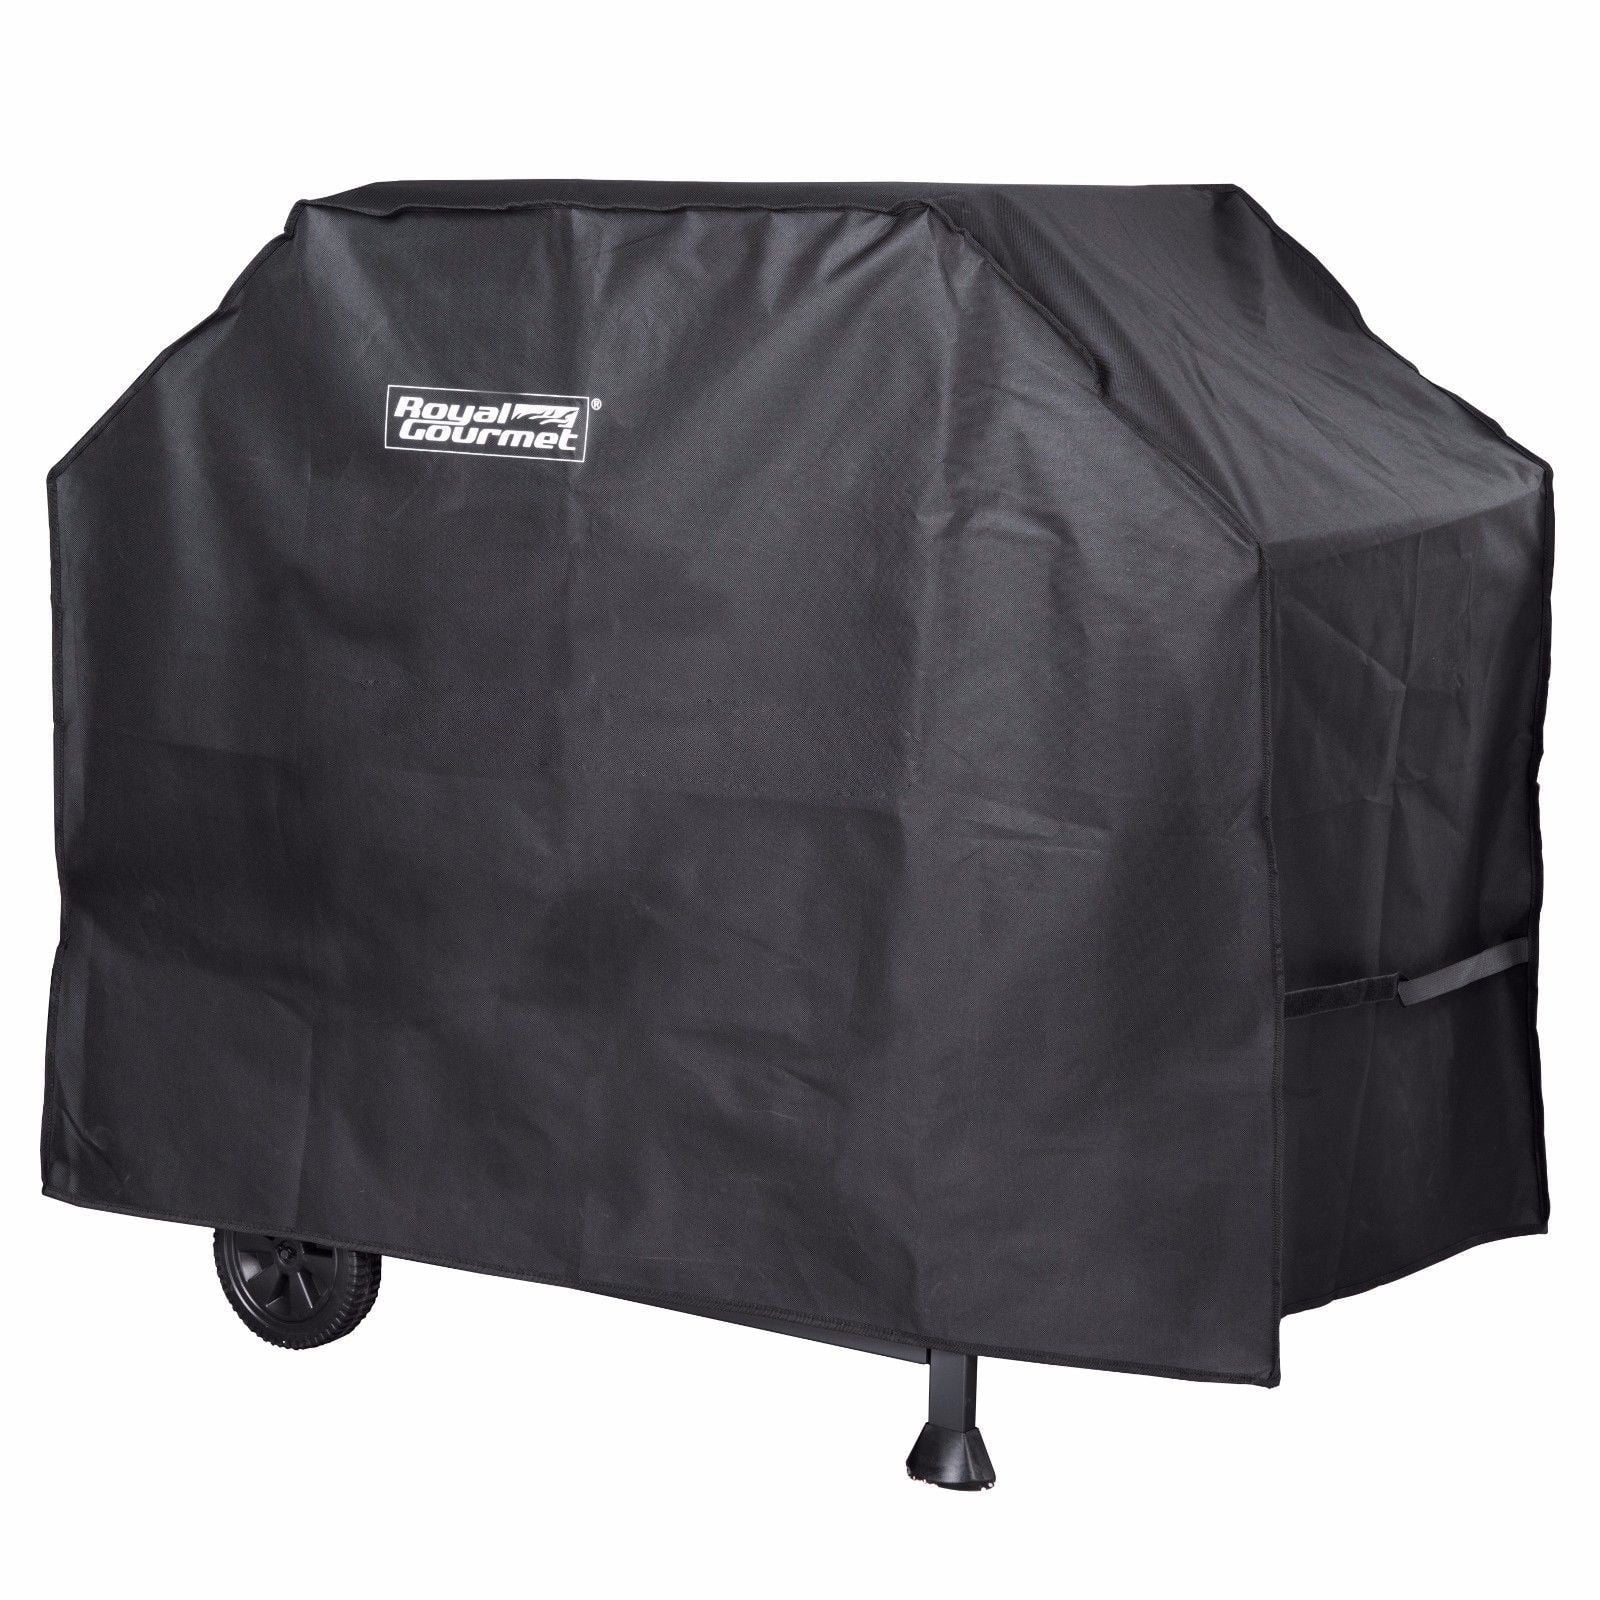 Royal Gourmet BBQ Grill Cover 76 Inch Heavy Duty Oxford Protection Storage Black 